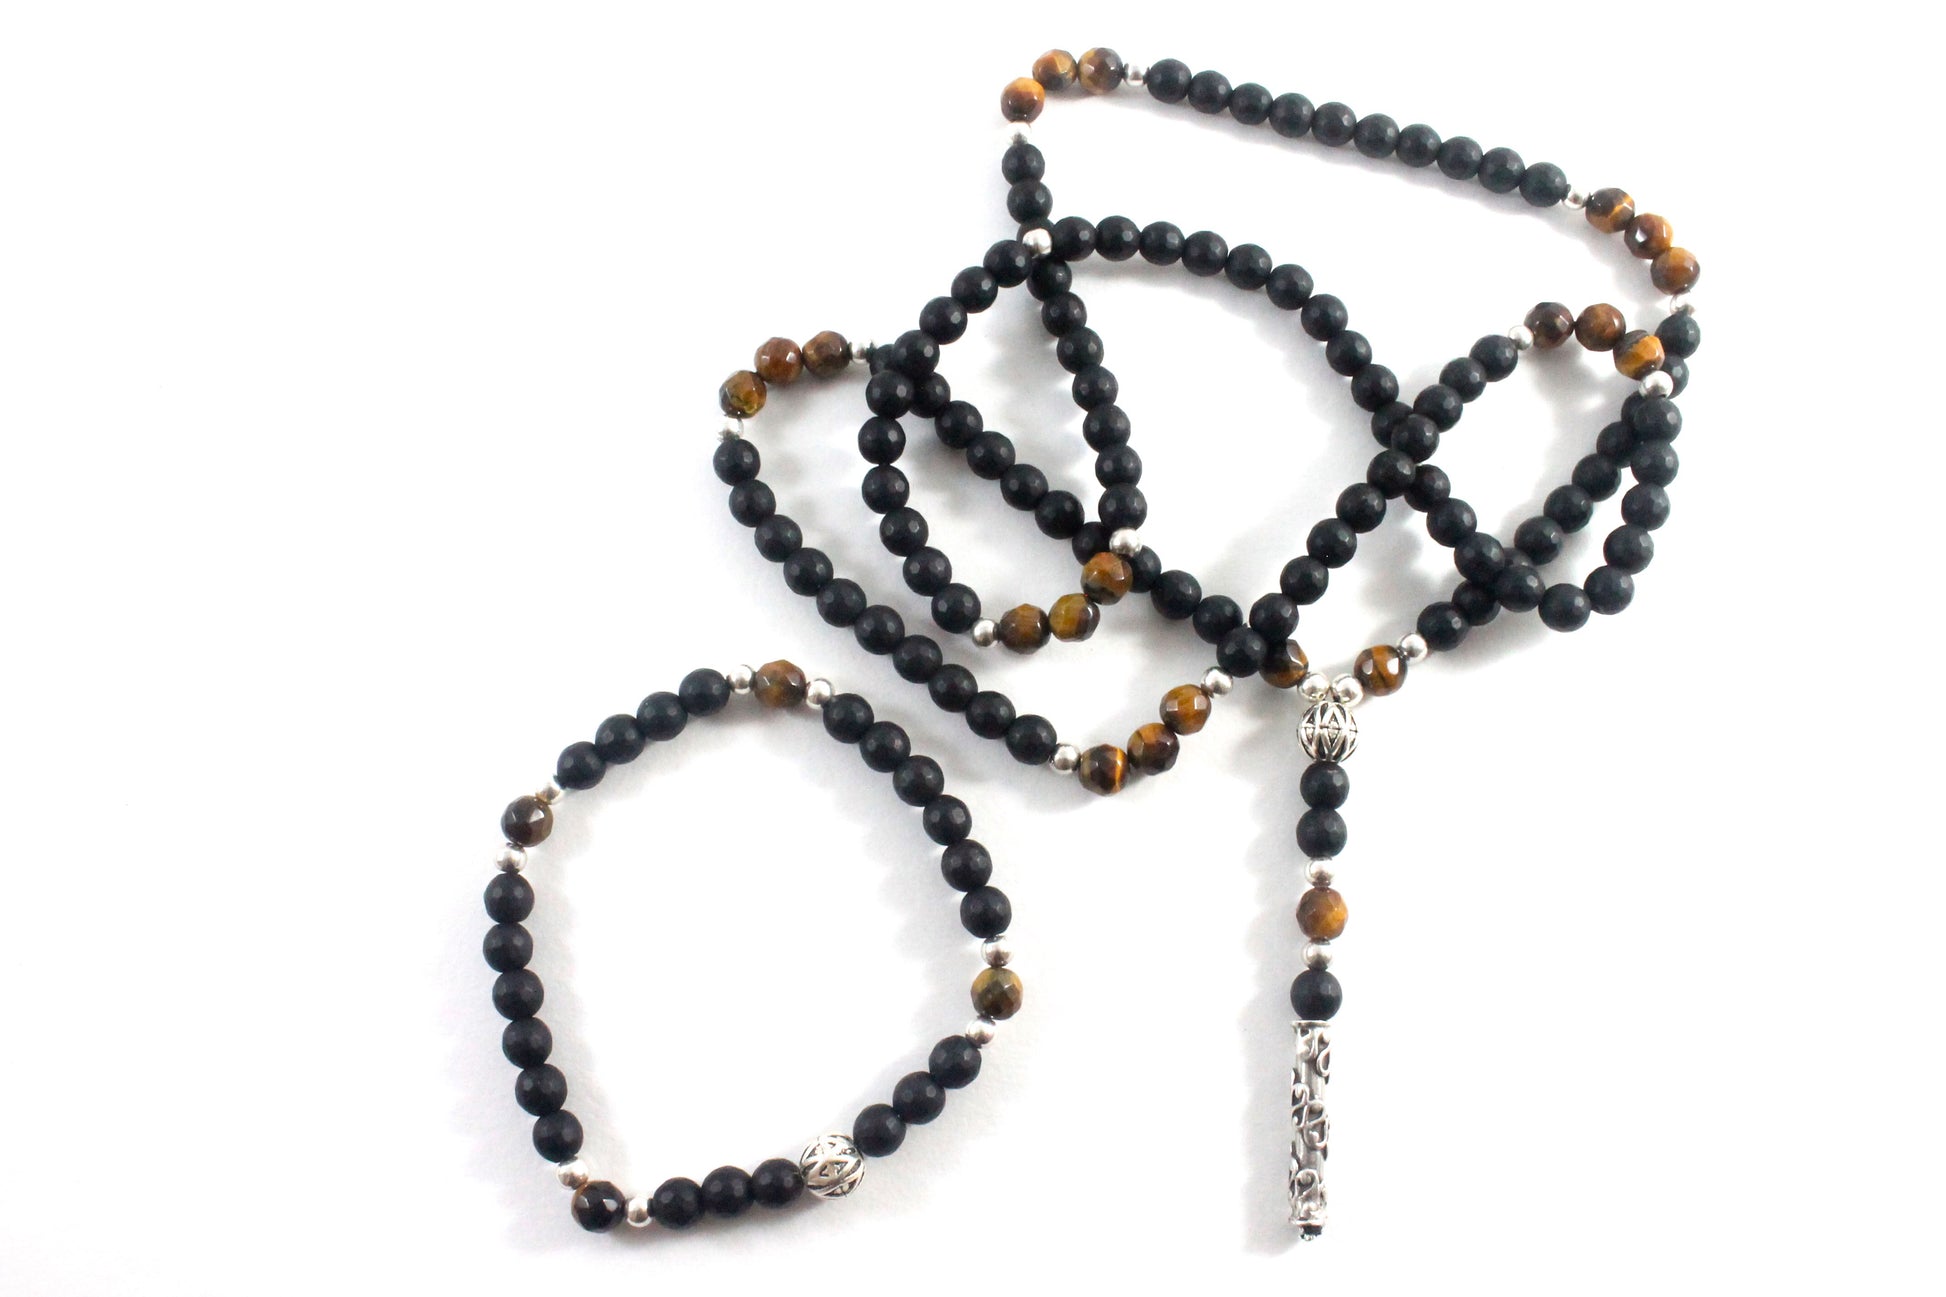 Onyx & Tiger’s Eye Necklace - Chakra Collection -The Ricci District